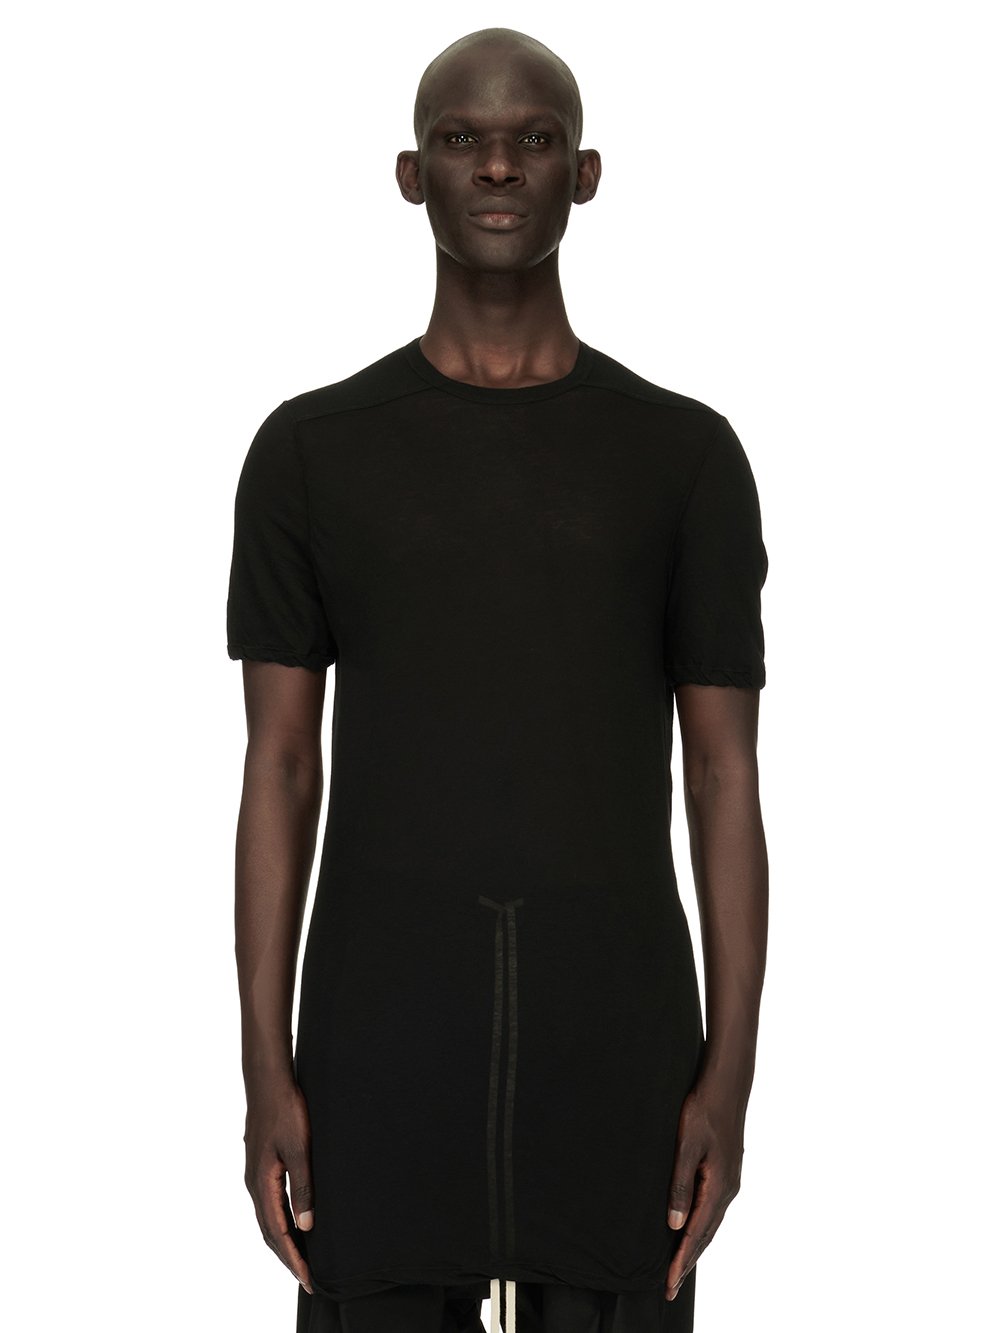 RICK OWENS FOREVER LEVEL T IN BLACK UNSTABLE COTTON